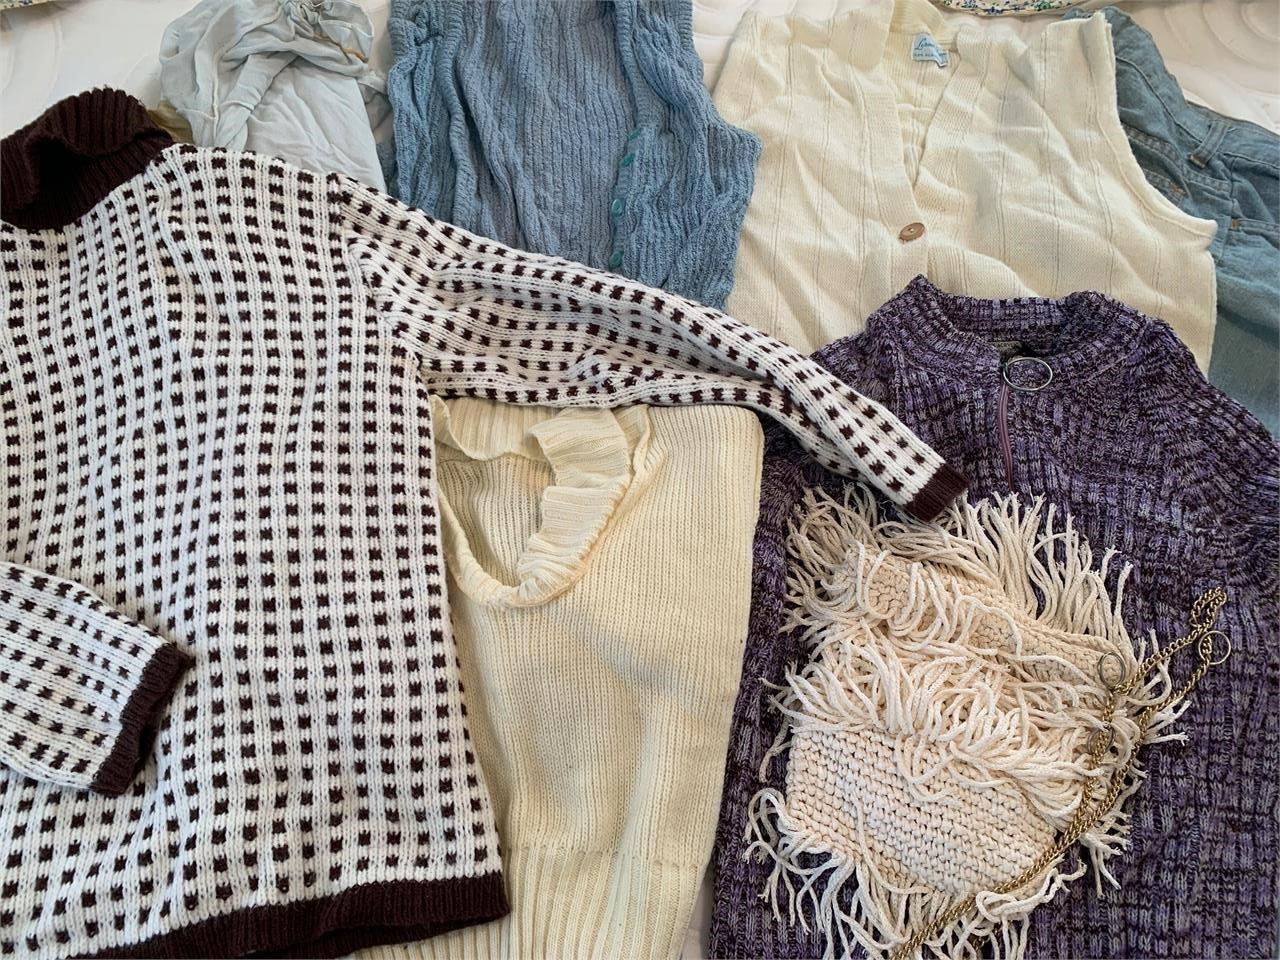 Vintage 70's Teen/Young Girl Clothes